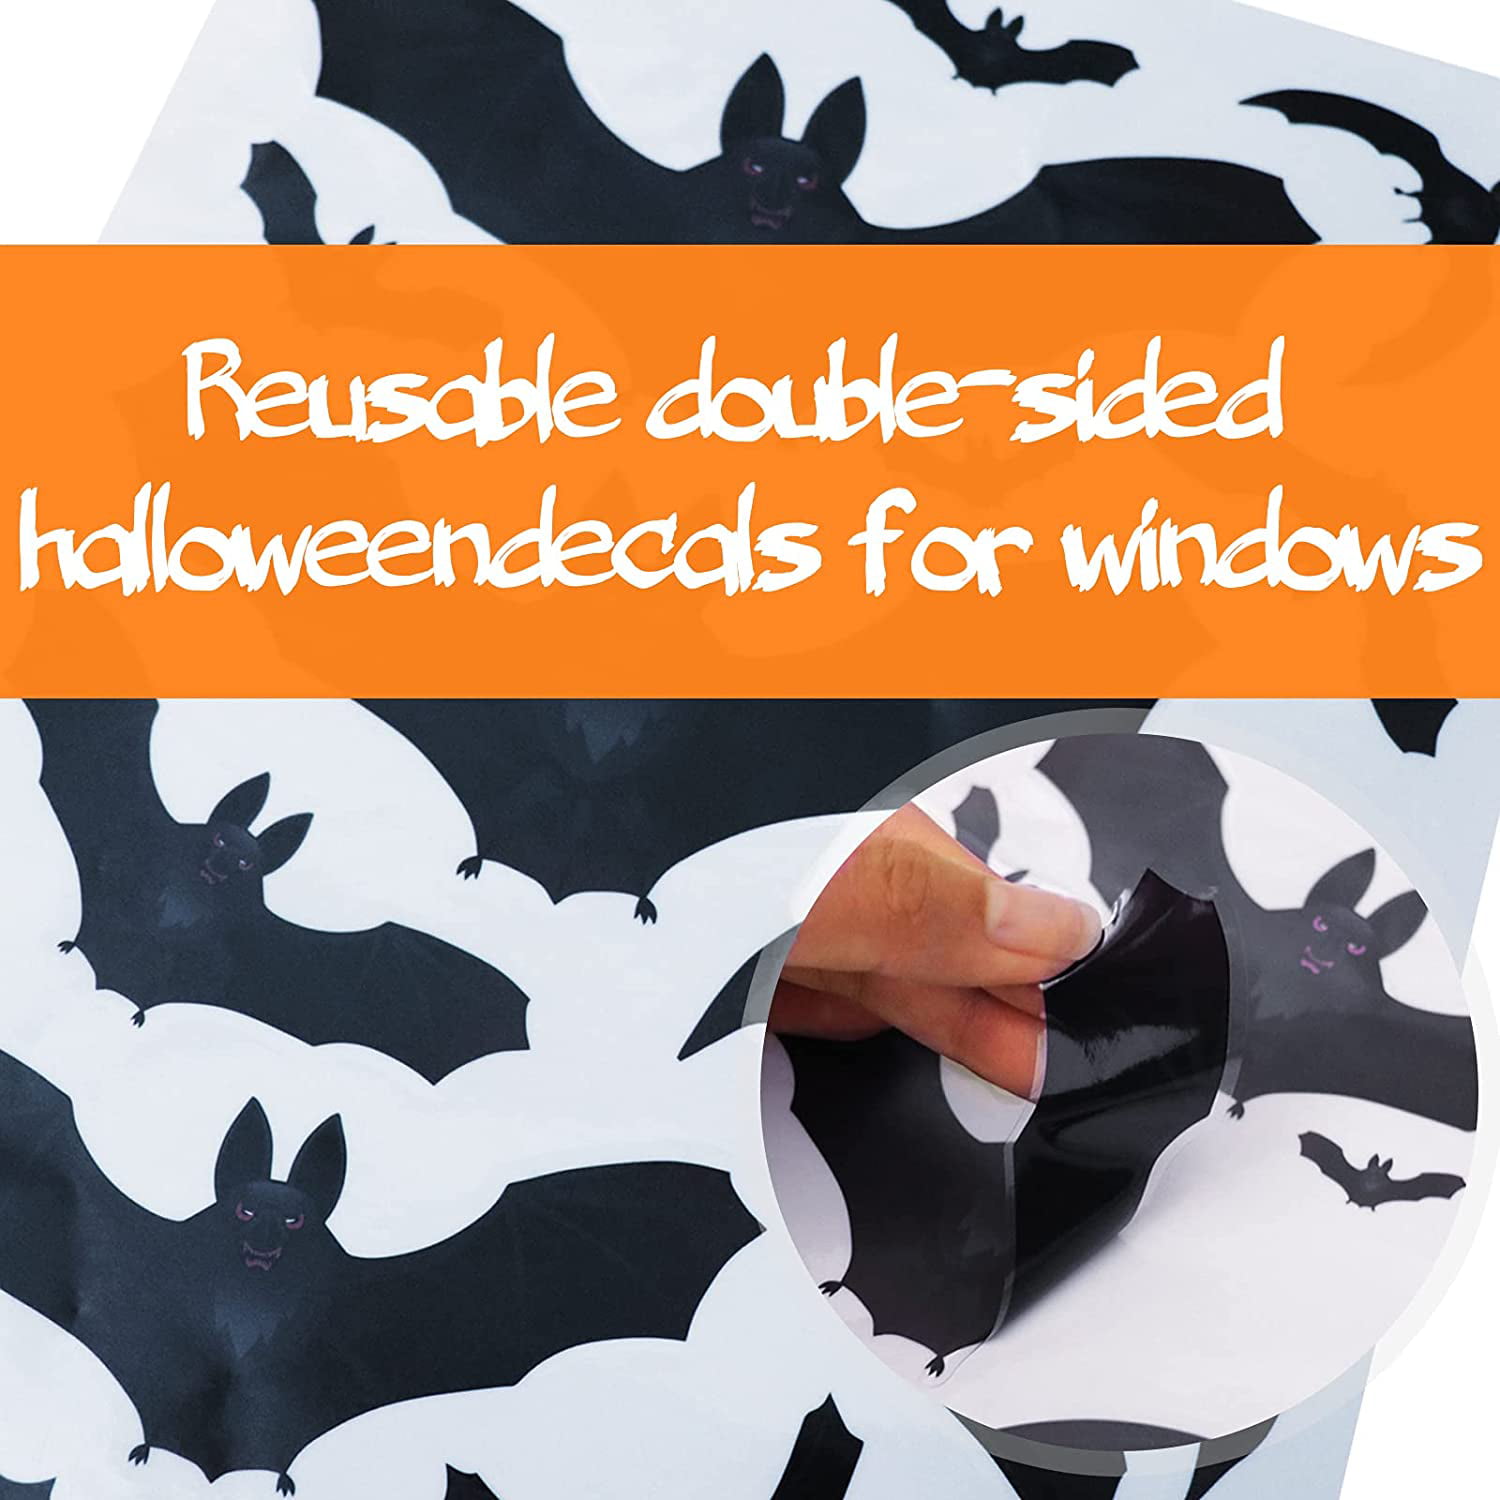 6Sheets 90Pcs Halloween Window Clings Halloween Window Decoration Black Bats Spiders Webs and Castle Dead Tree Static Stickers Halloween Window Decals for Windows Glass Walls Decorations